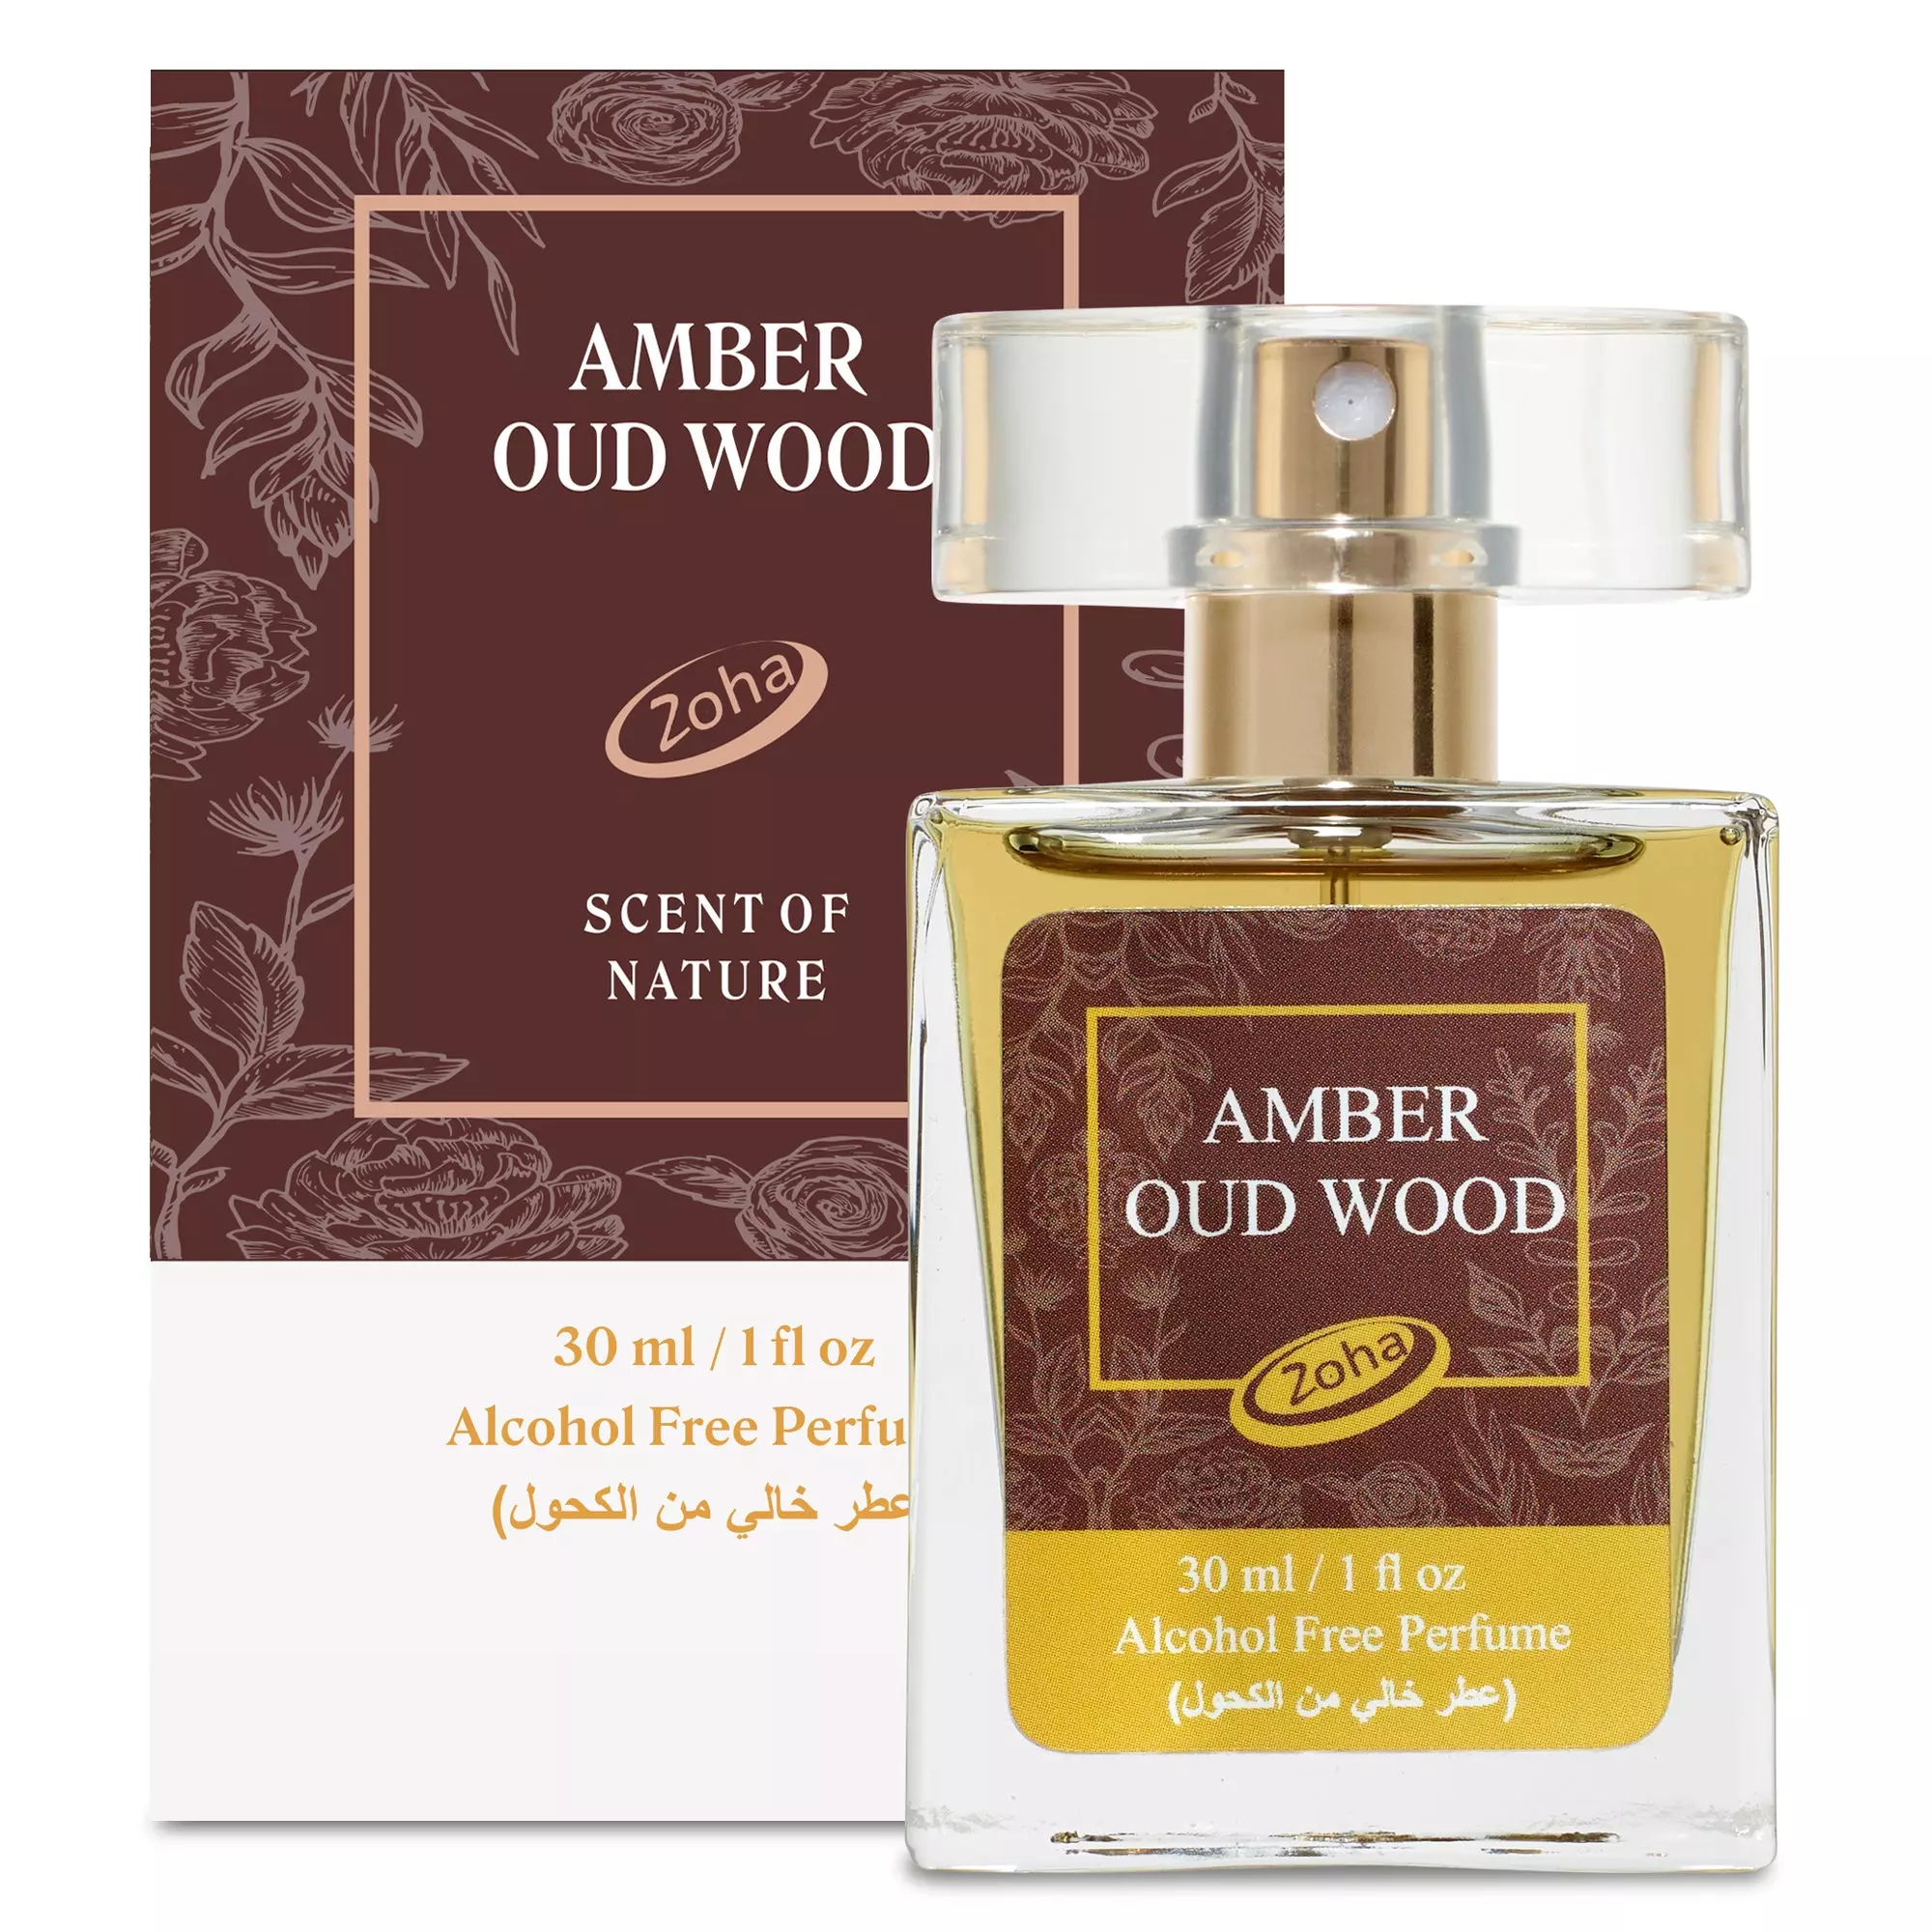 Amber Oud Wood (a.k.a Spice Woods) 